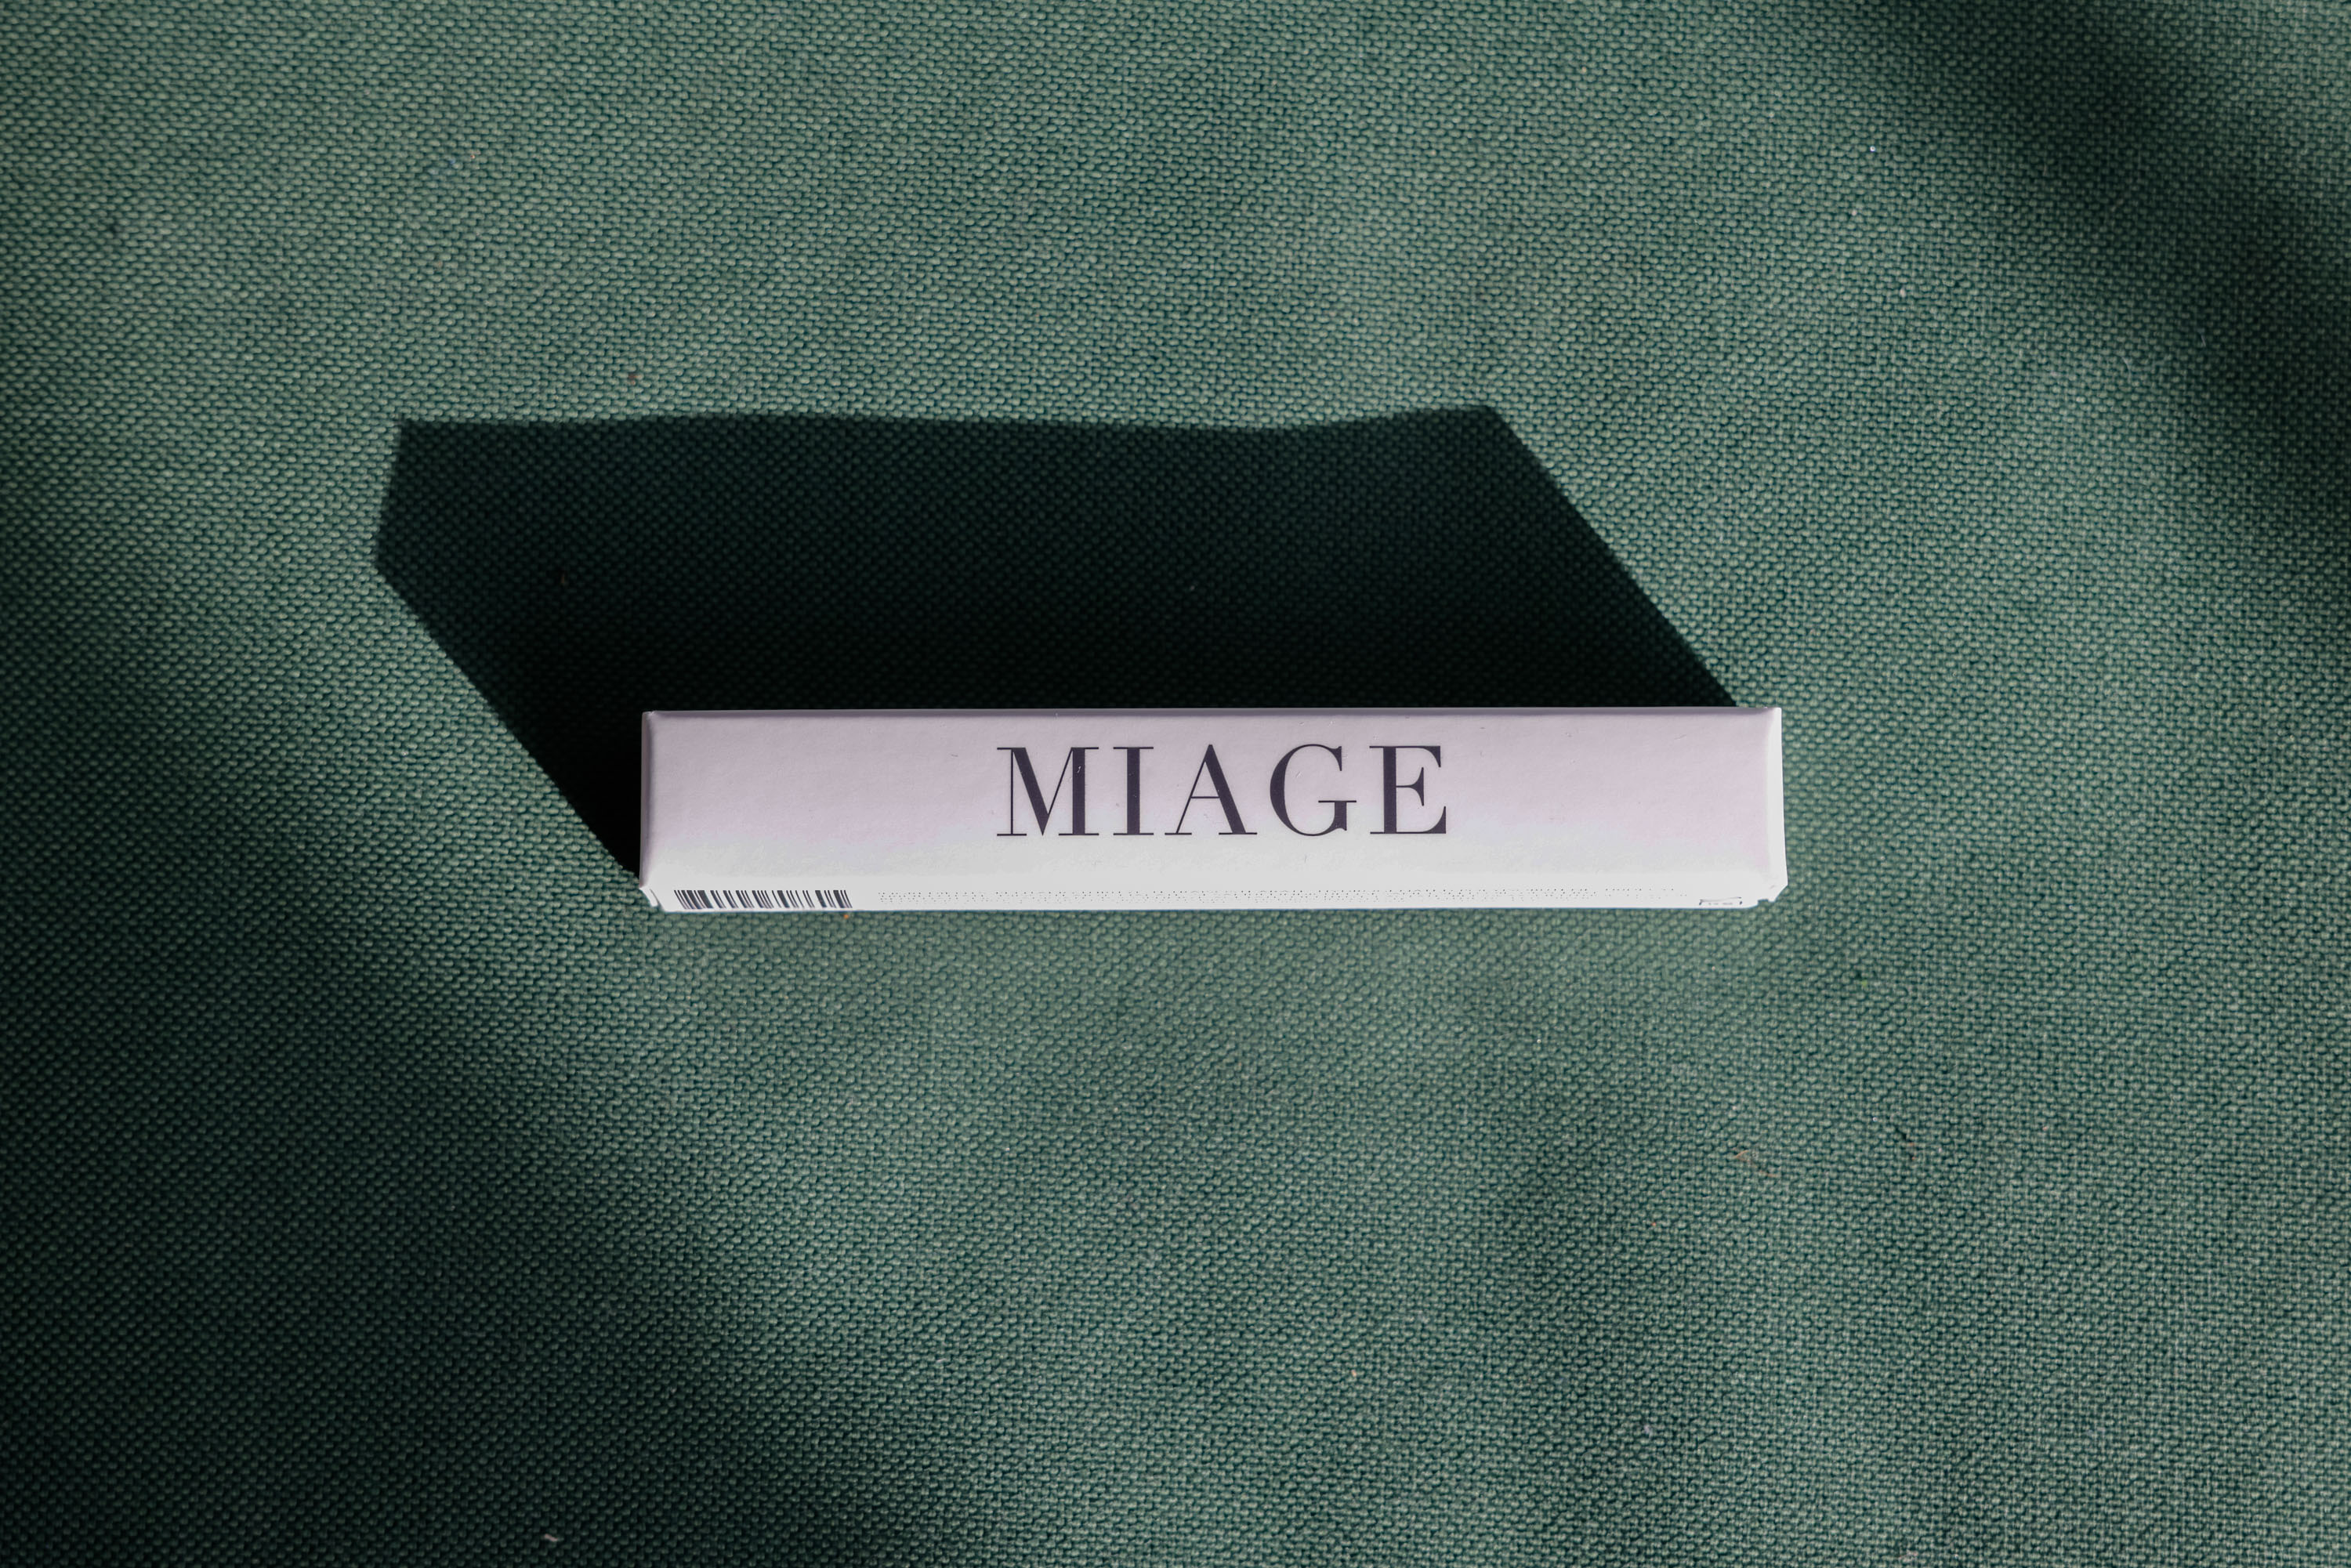 A top-down product shot Miage.